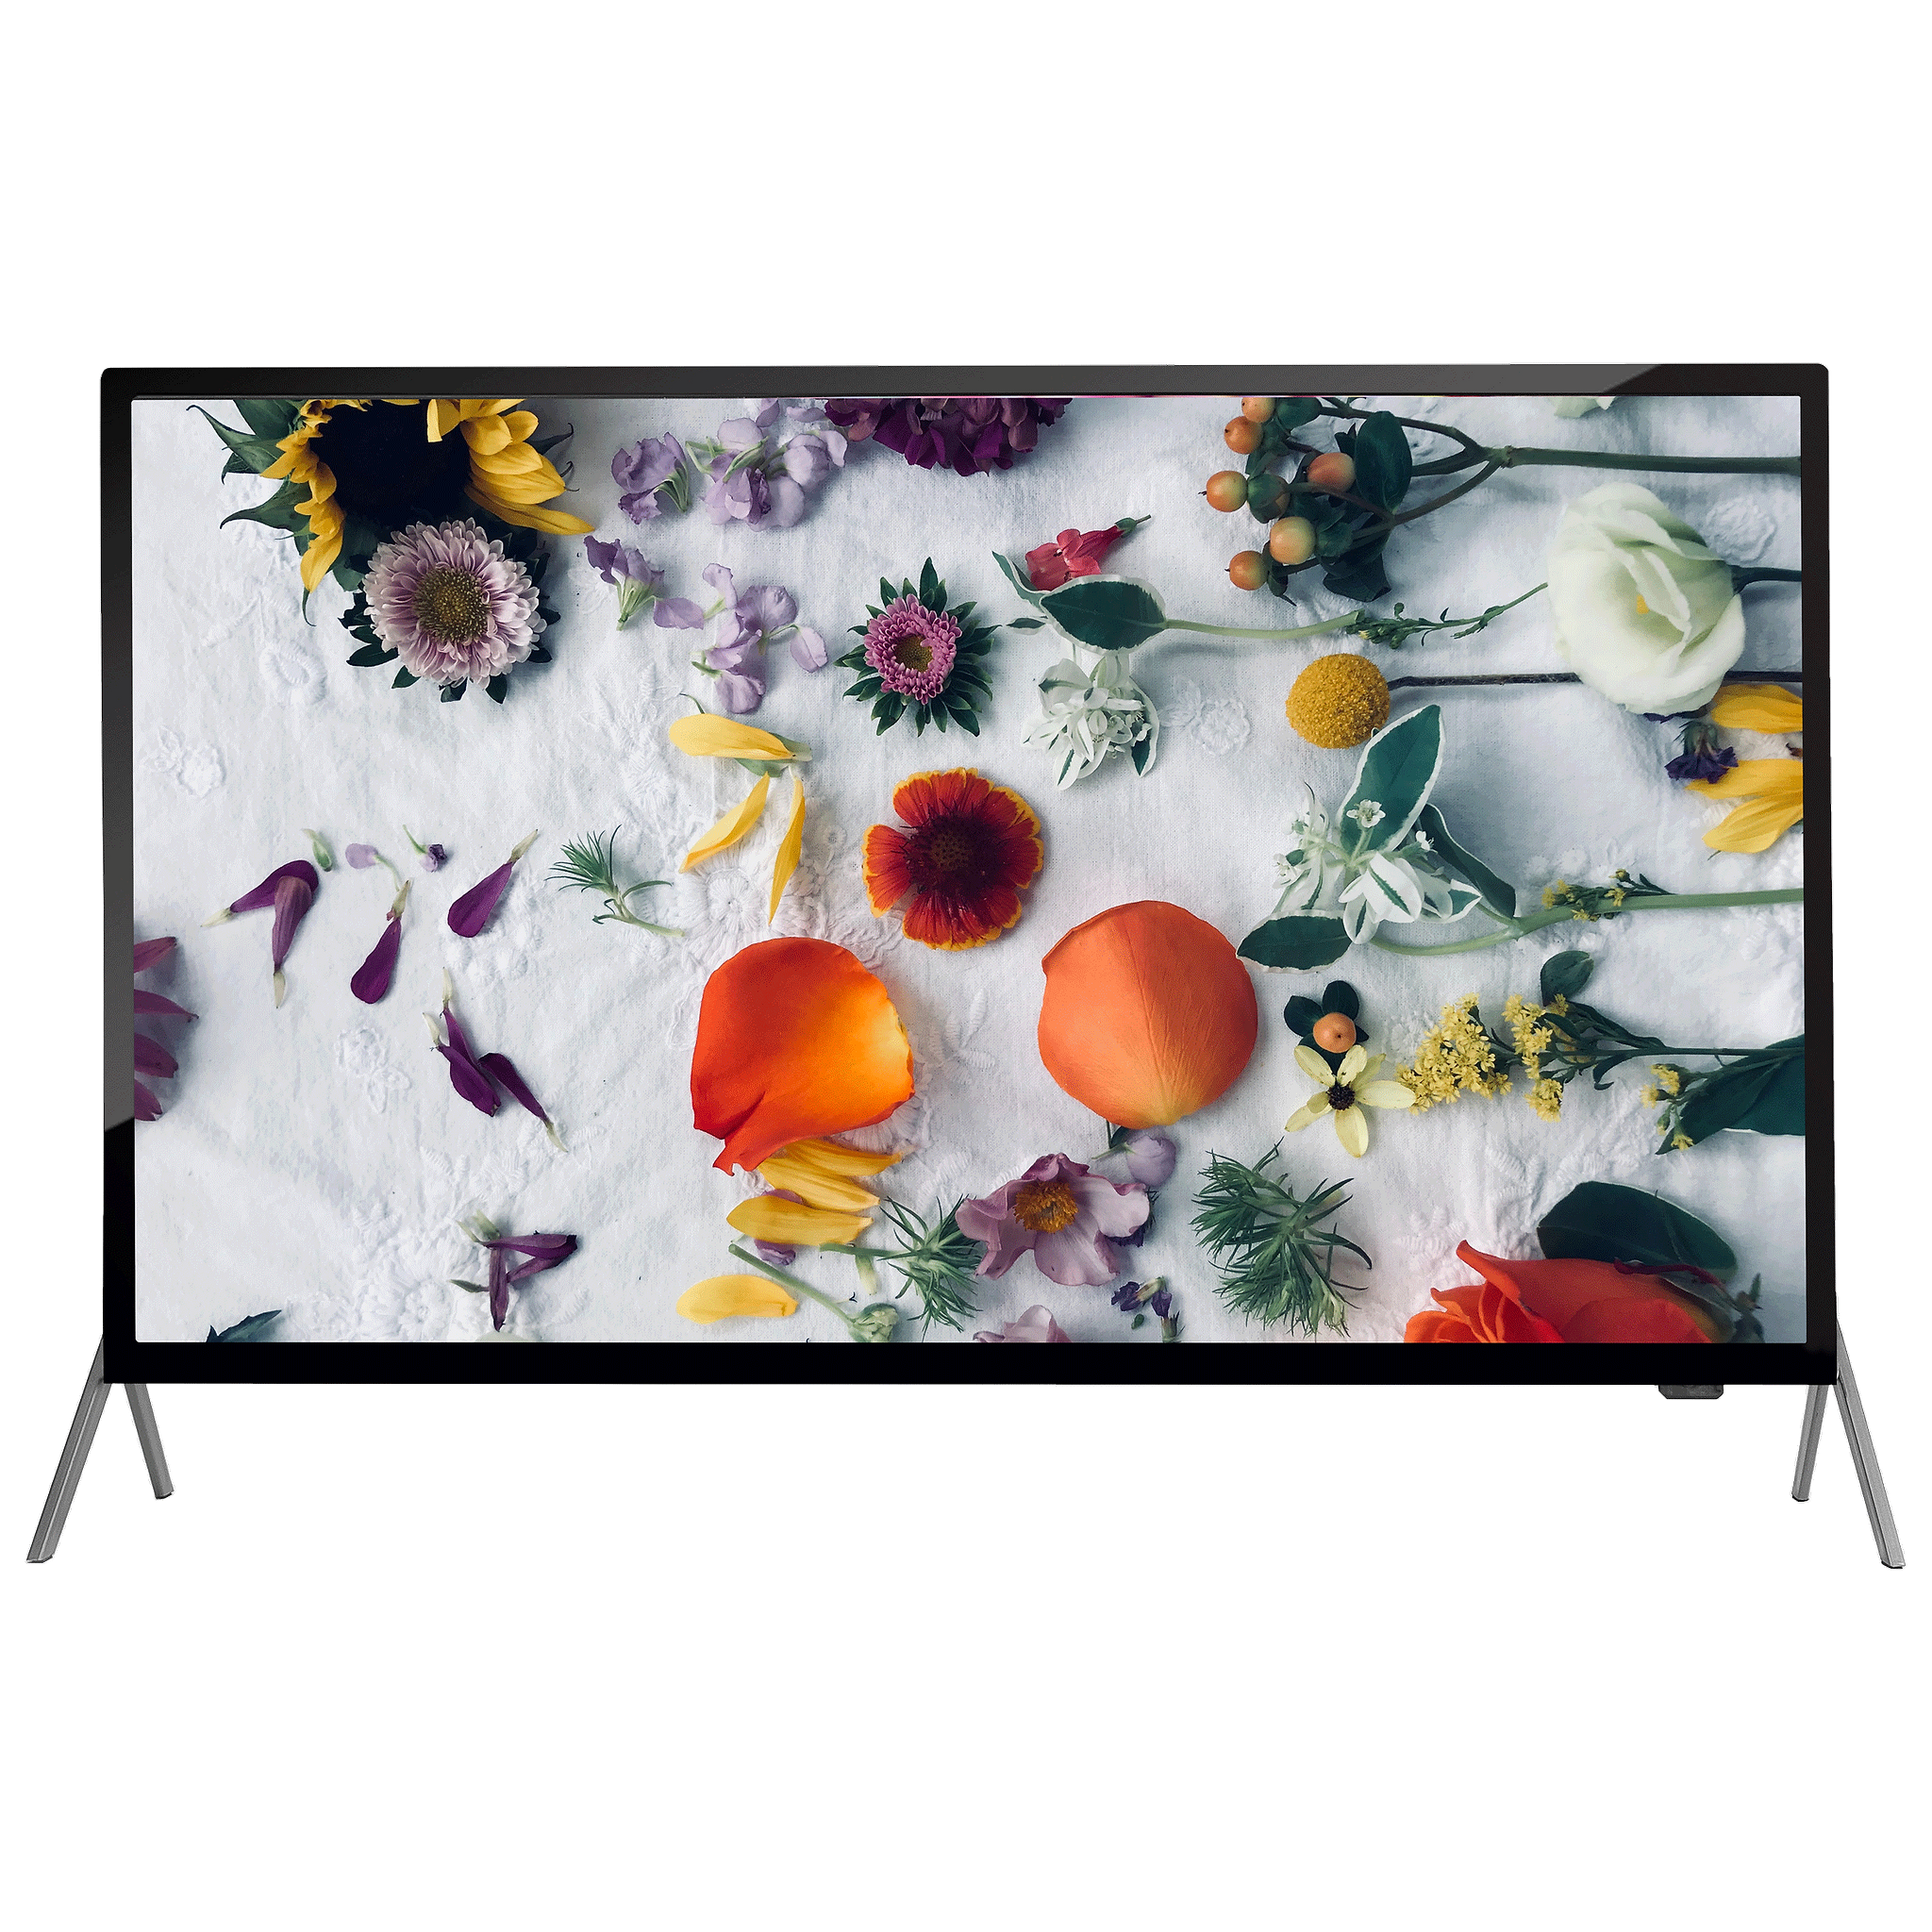 Croma Retail - Treeview Magma 80cm (32 Inches) HD Ready Flat Panel Android Smart TV (Dynamic Picture Mode, IND3202ST, Black)